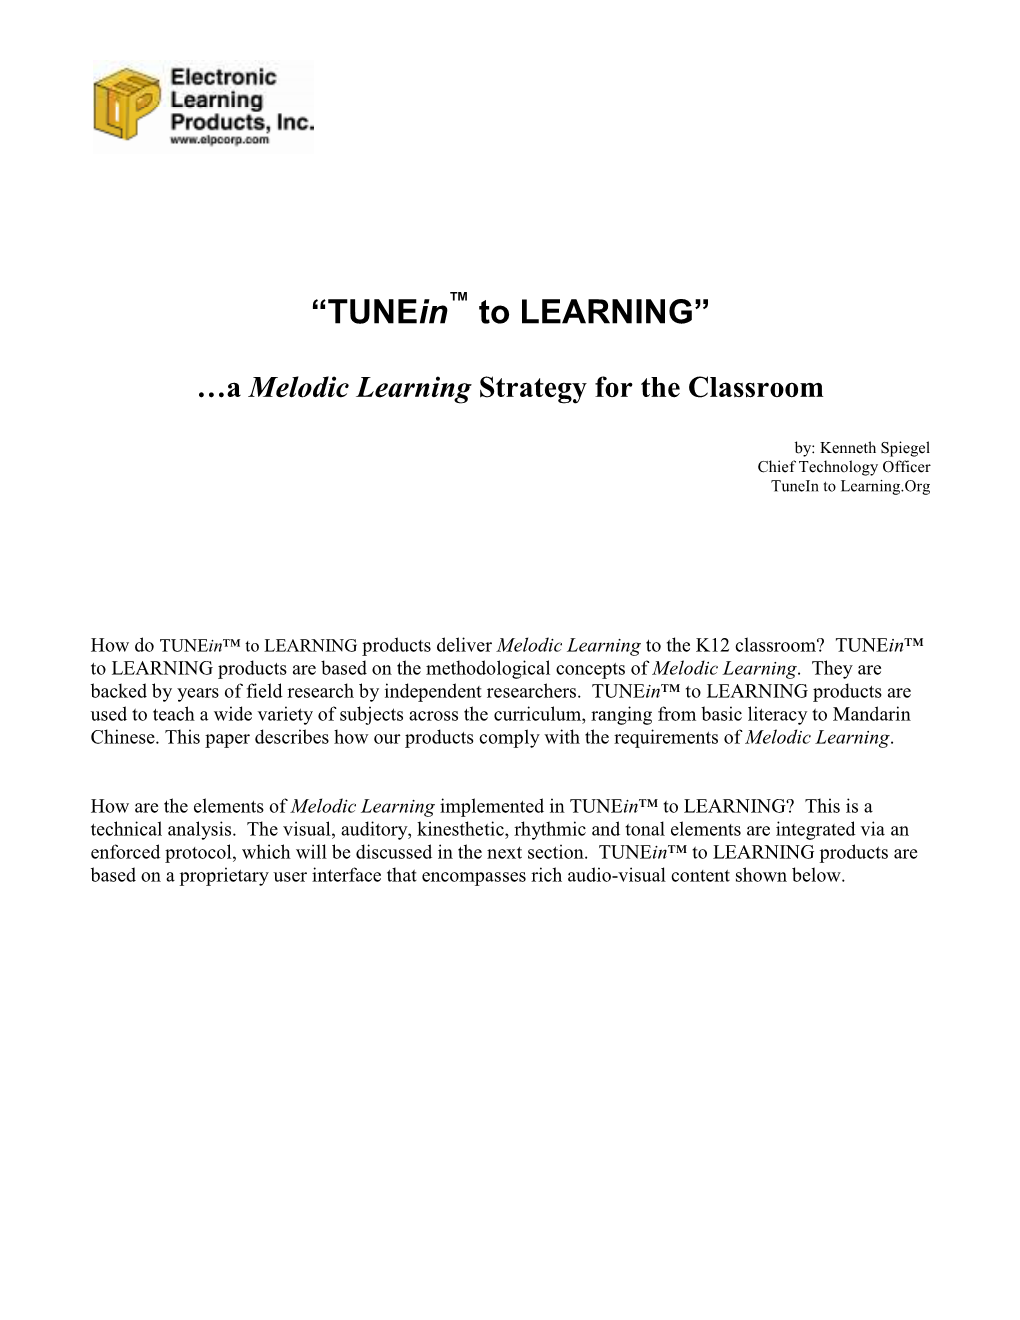 Tunein to LEARNING, a Melodic Learning Strategy for the Classroom